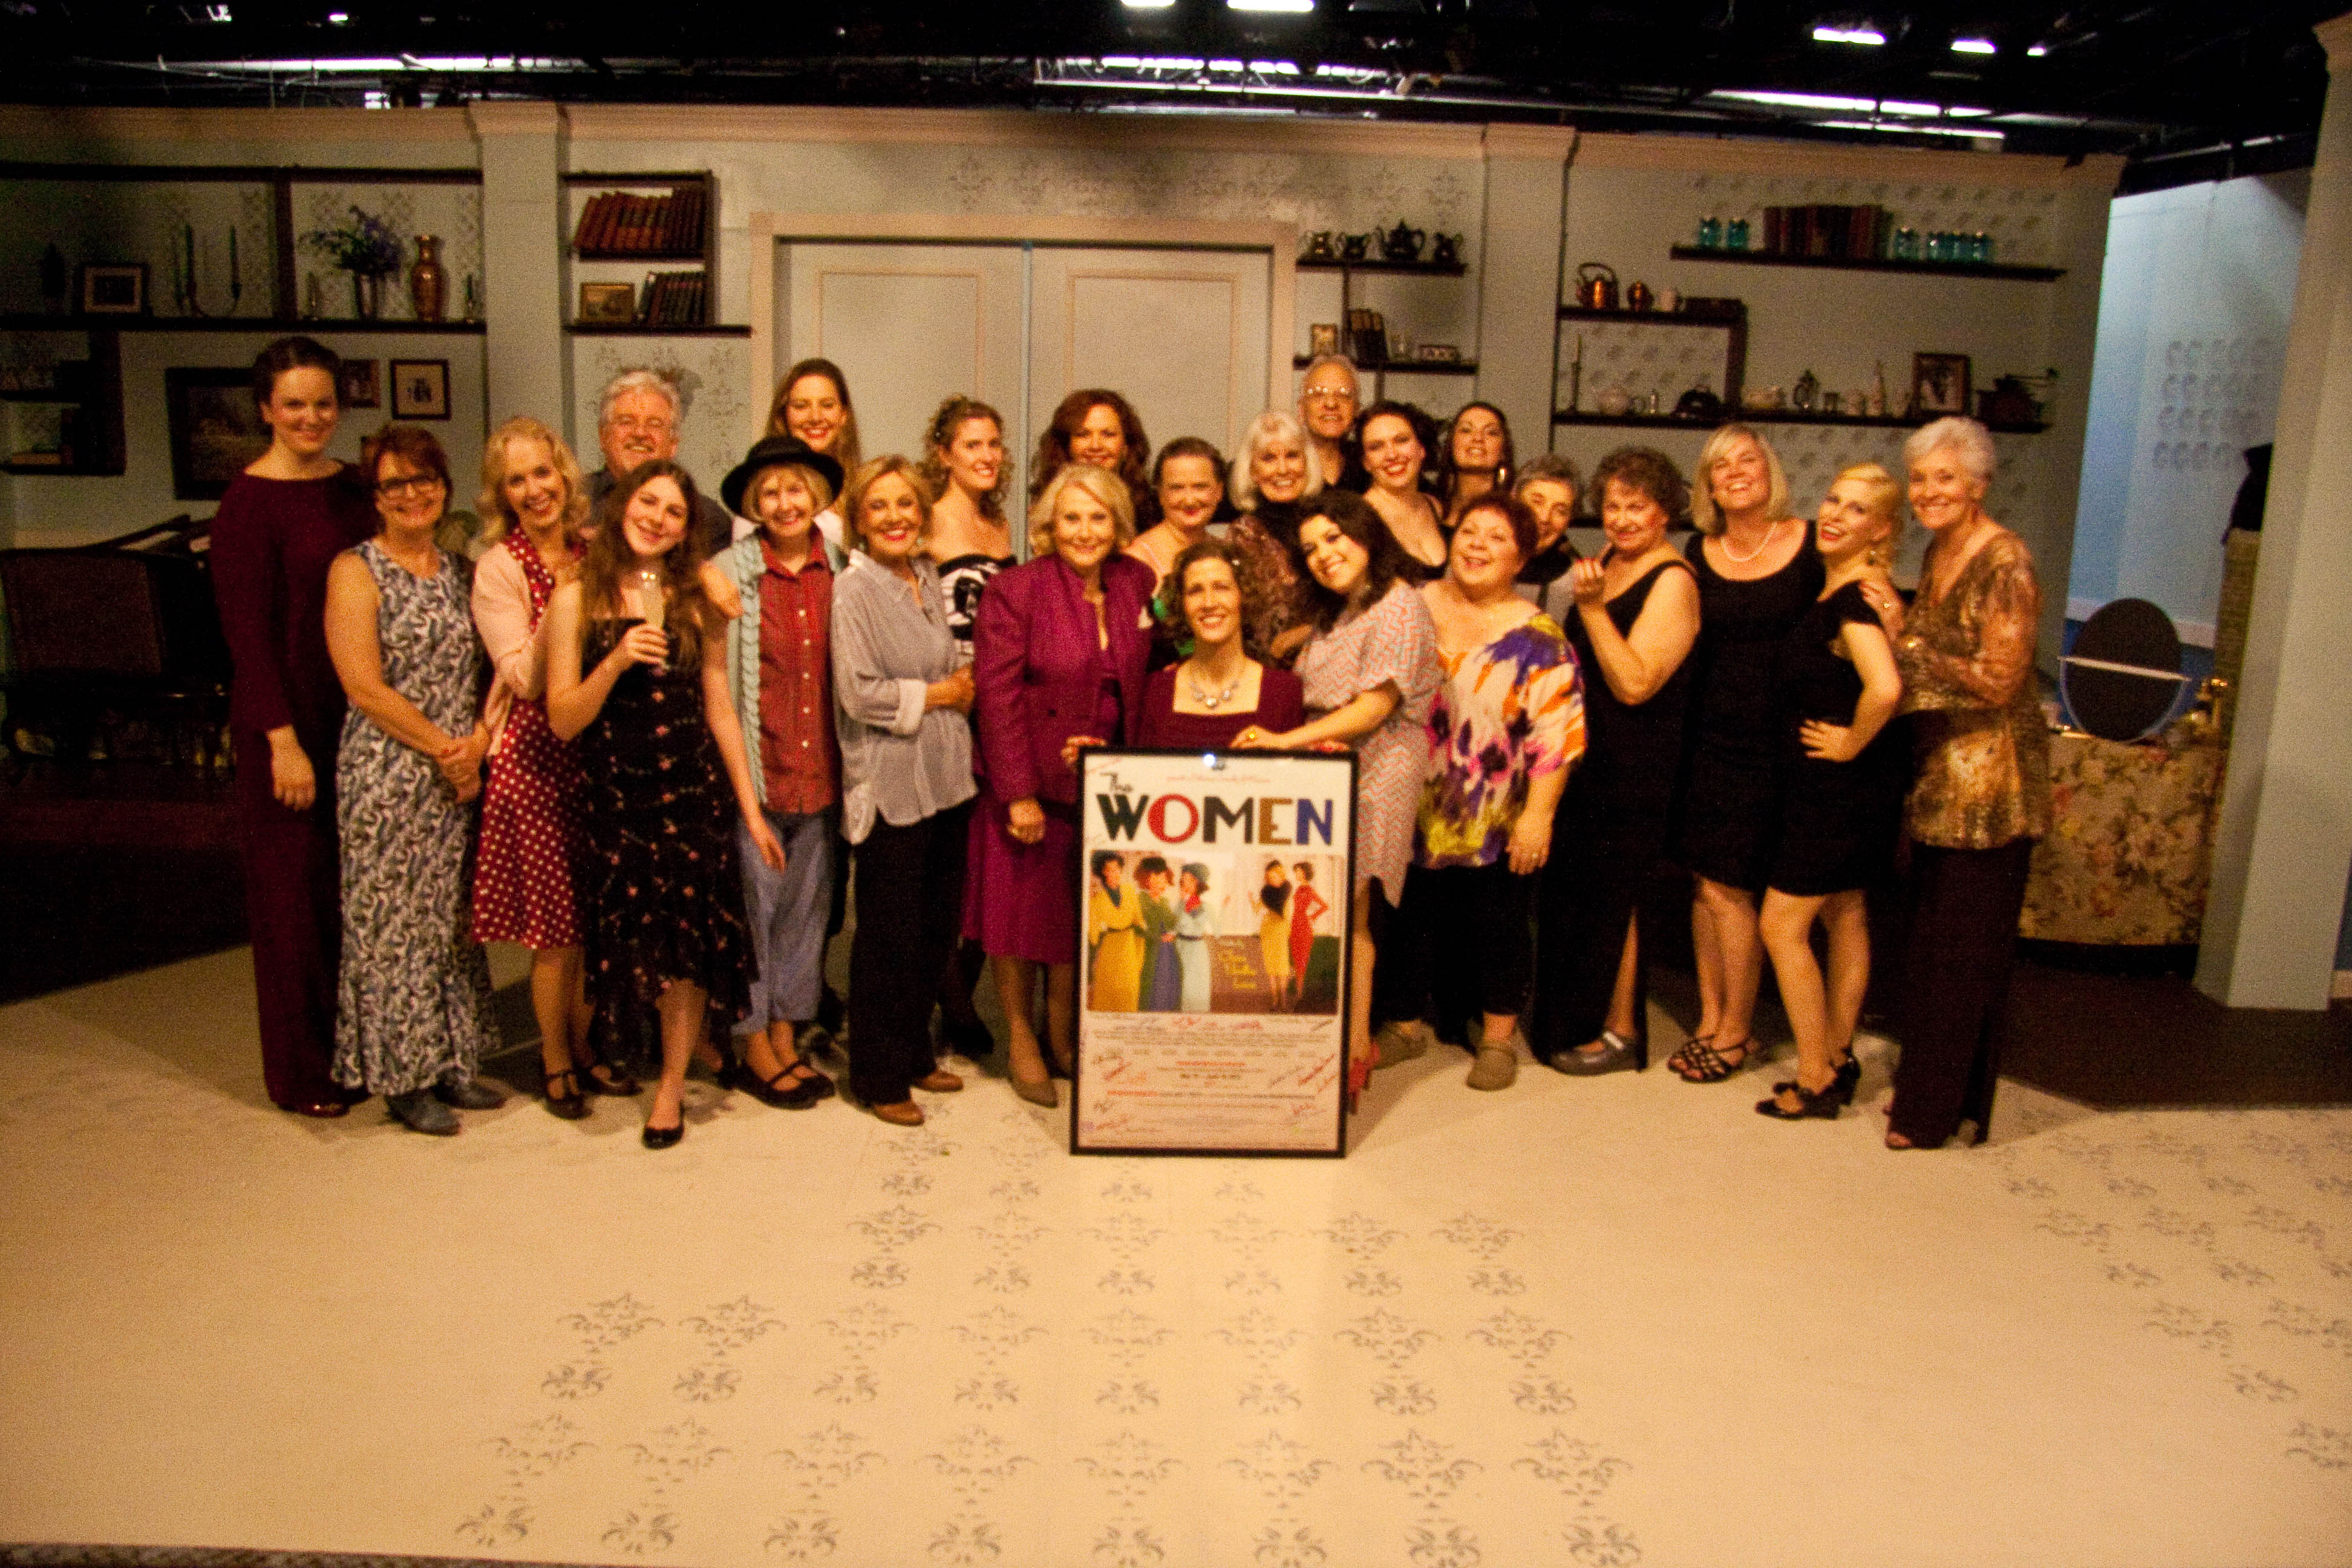 Cast of The Women - May 10th - June 16th, 2013.